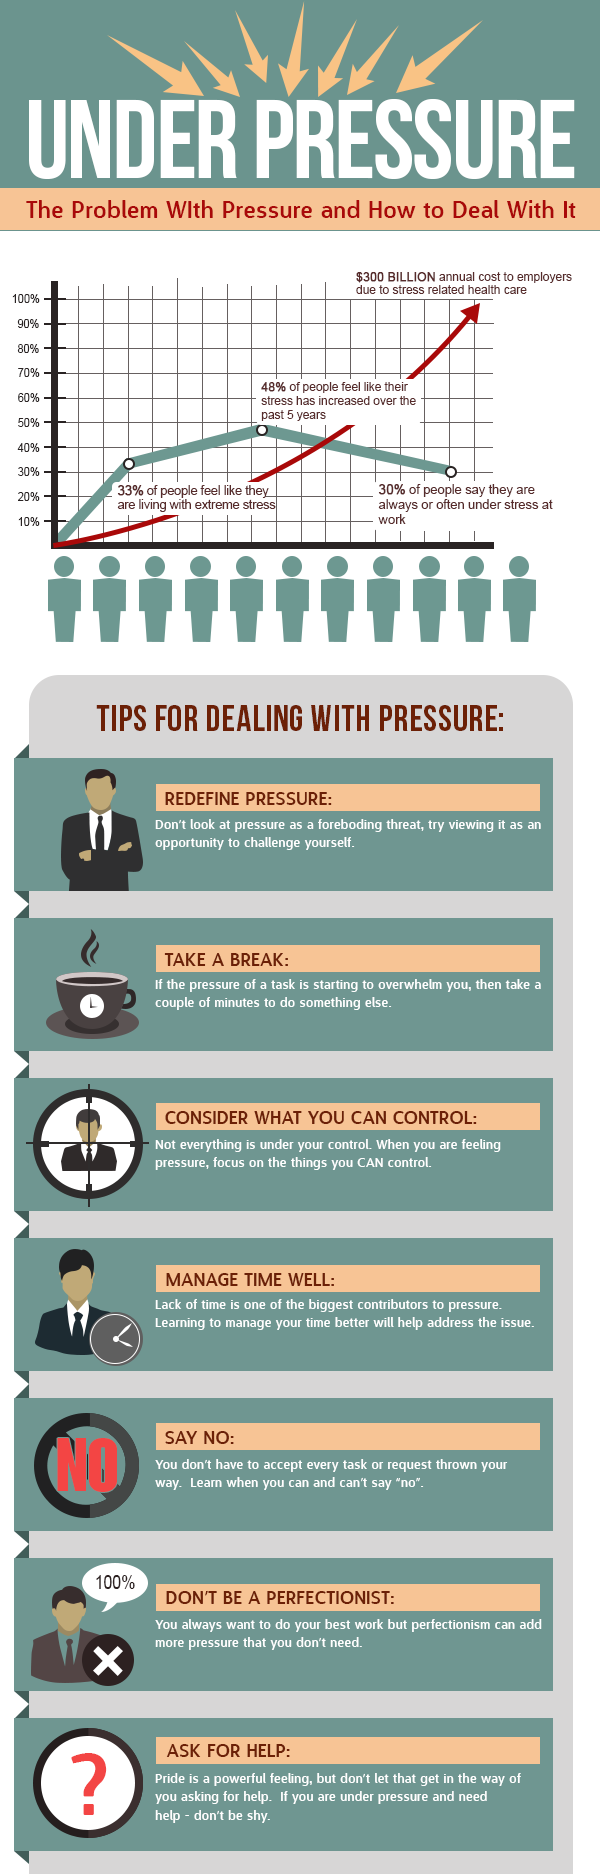 Dealing with Pressure